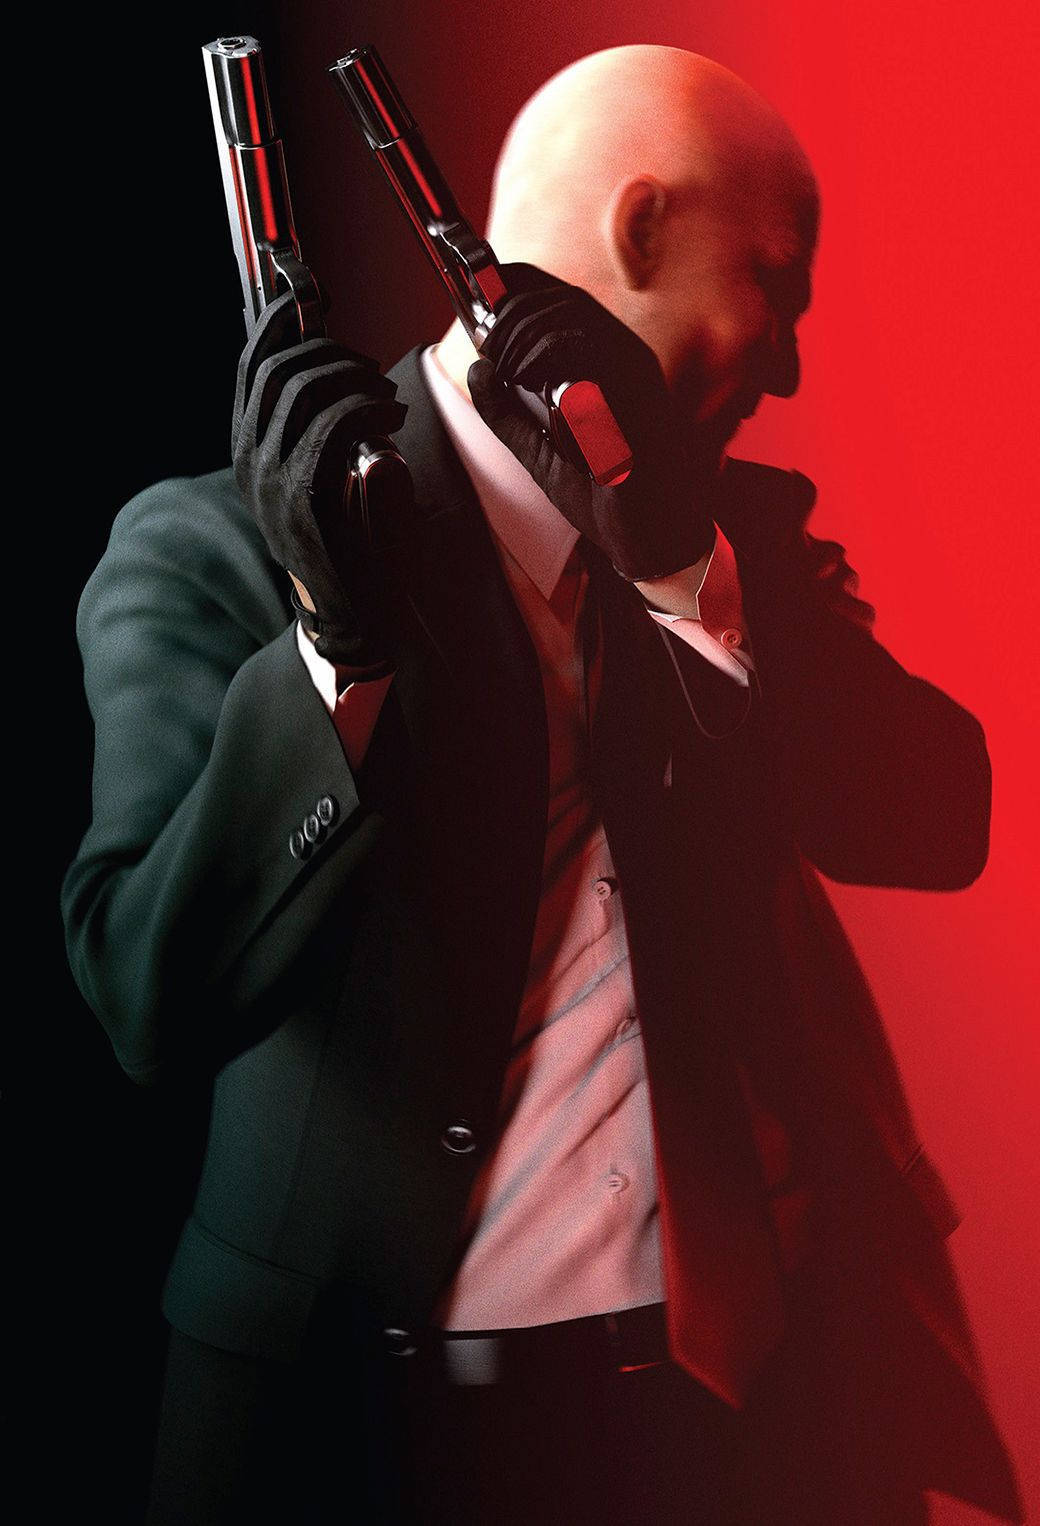 An Intense Portrait Of The Hitman In A Red Background